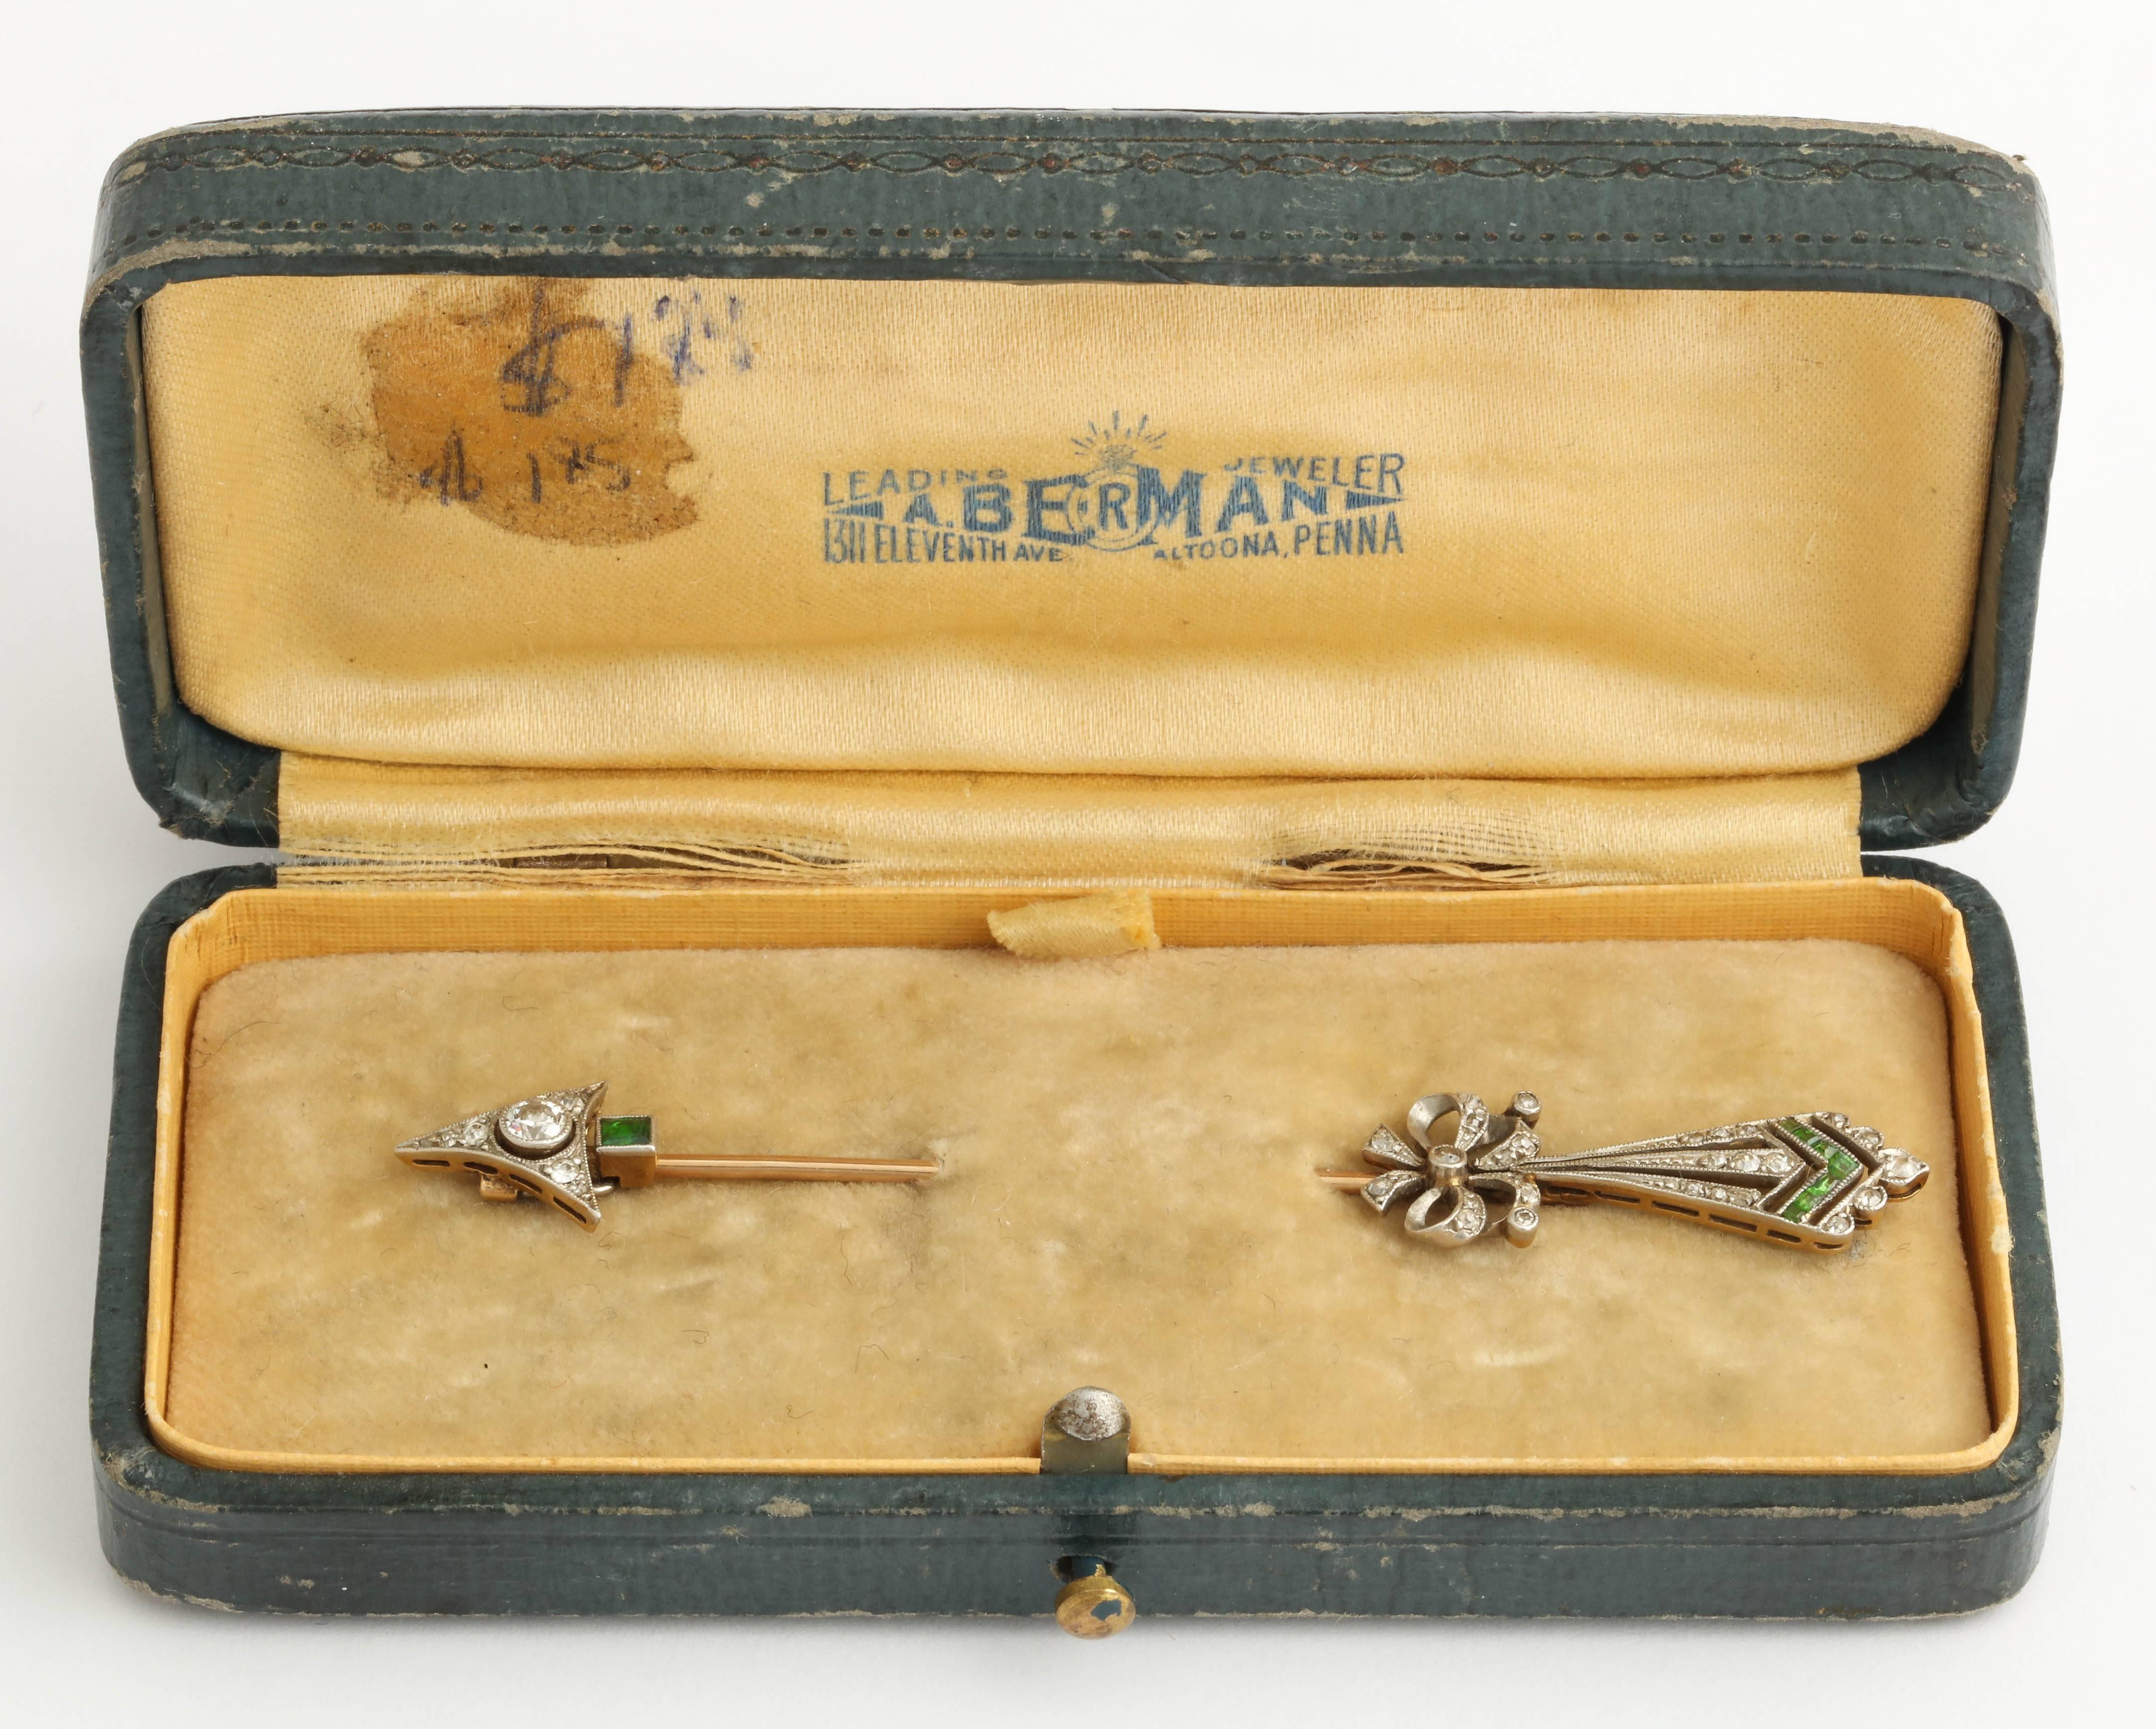 Stunning platinum on 18k yellow gold arrow brooch in original fitted box. It is American made c.1920. The brooch is set with emeralds and old cut diamonds